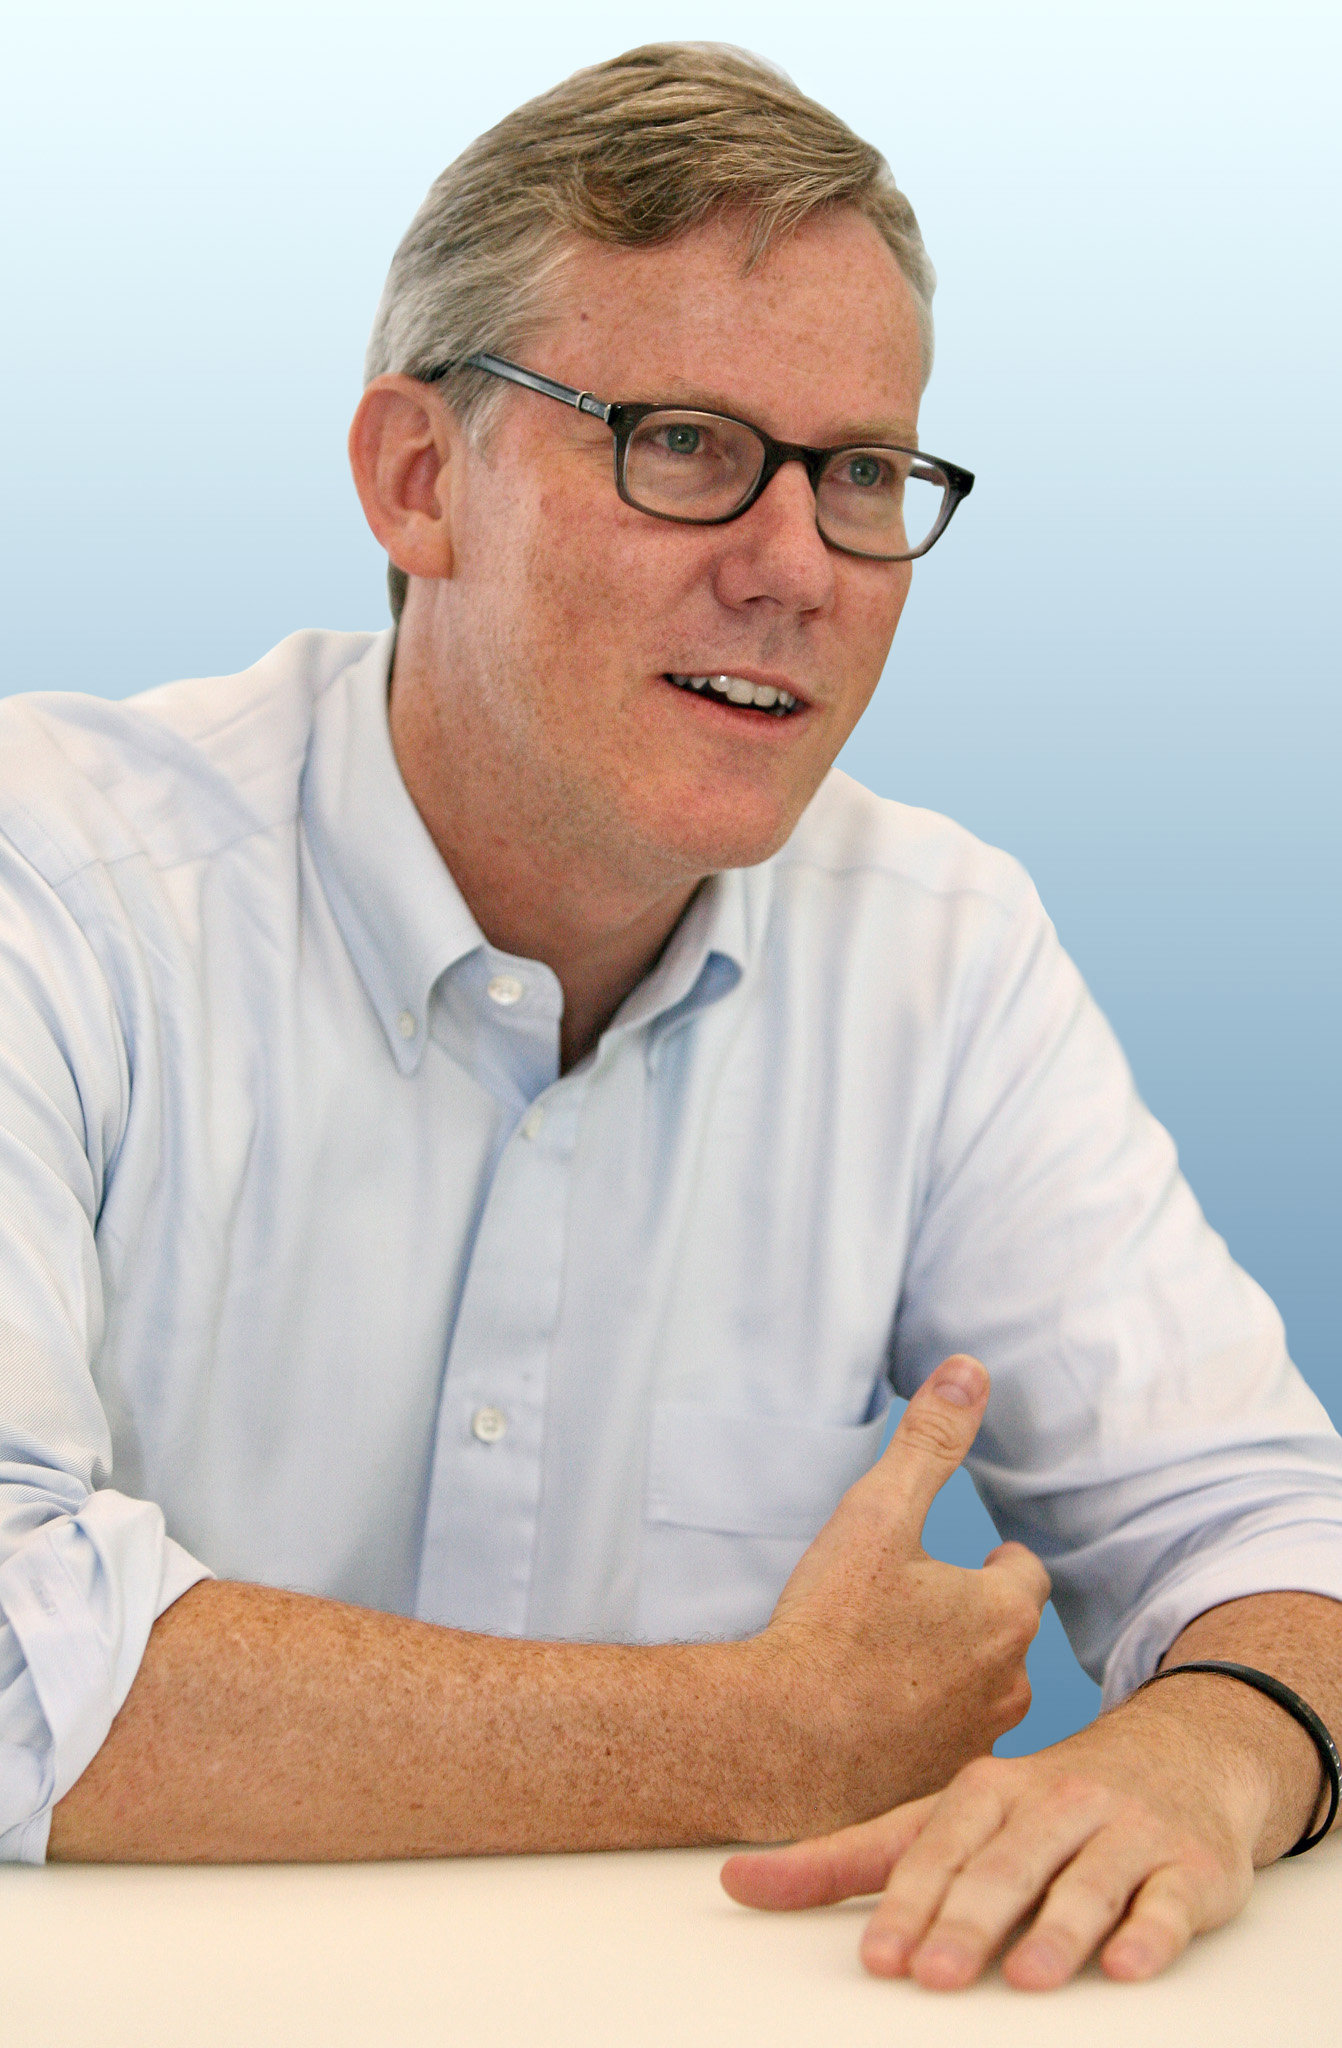 Brian Halligan wearing a white long sleeves and eyeglasses